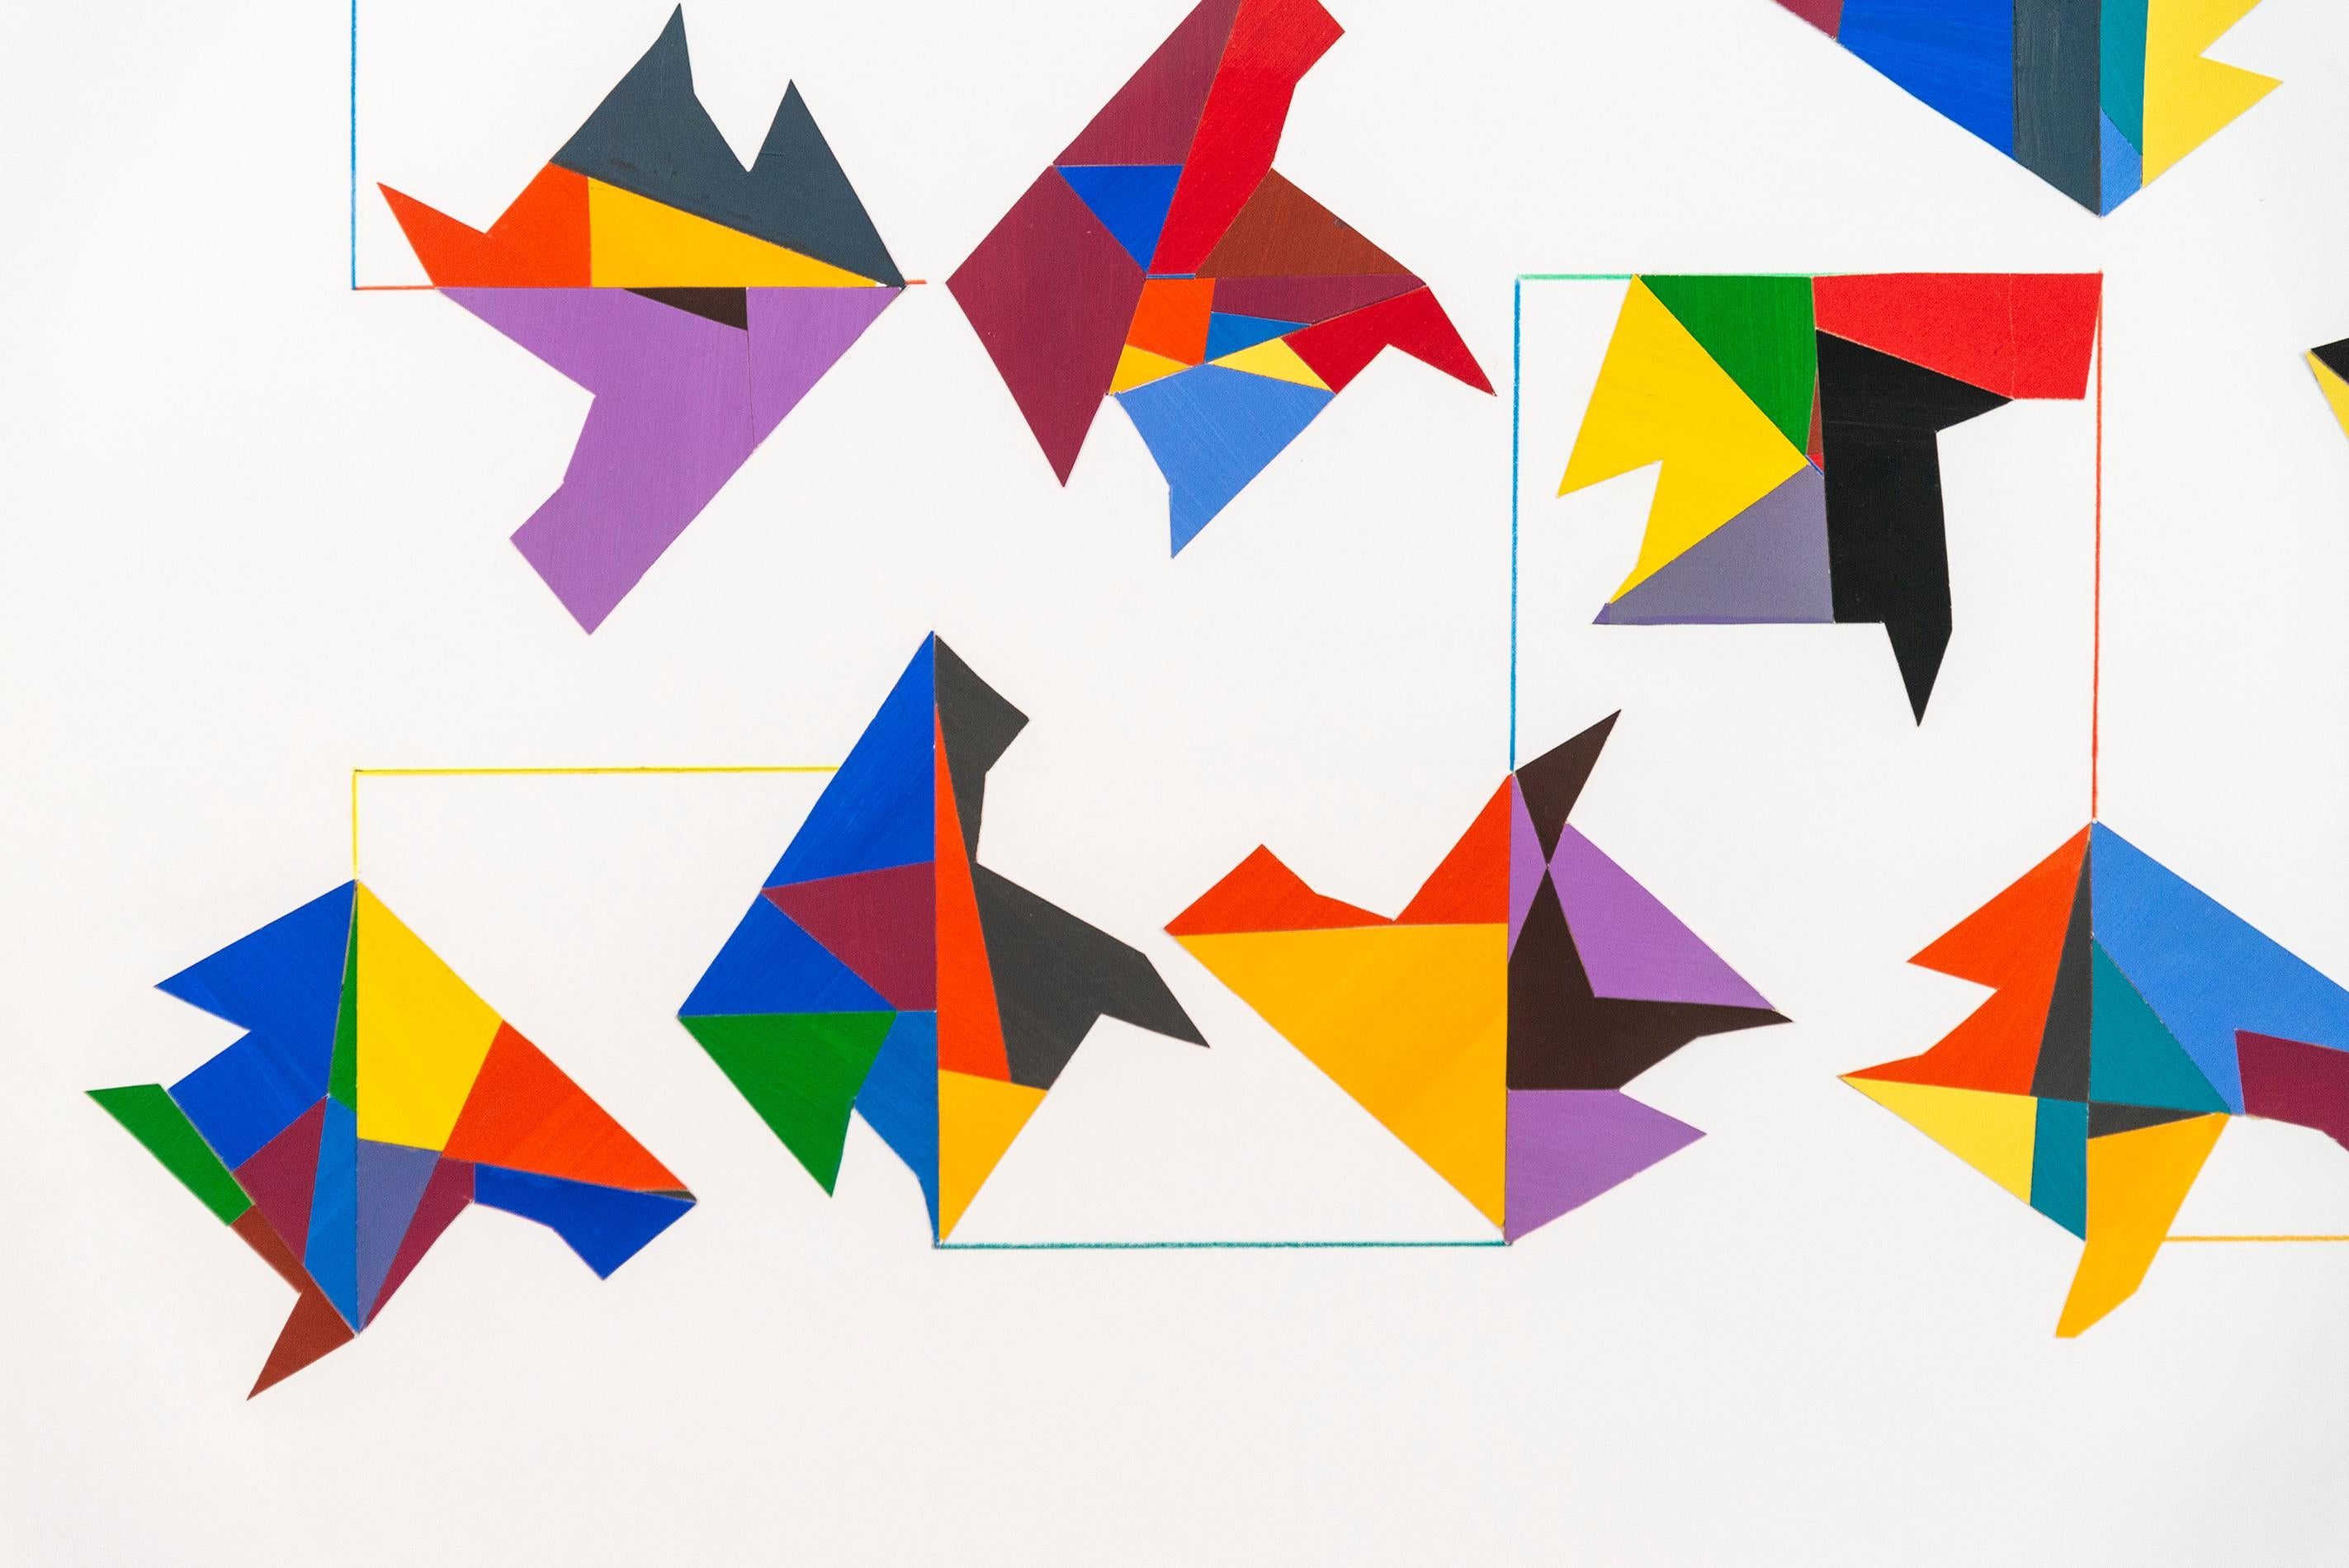 This bold contemporary composition by Yvonne Lammerich is an intriguing exploration of colour and form. Origami-like folded shapes inter-connected by fine lines dance across this collage on paper rendered in a vibrant colour palette of jet black,